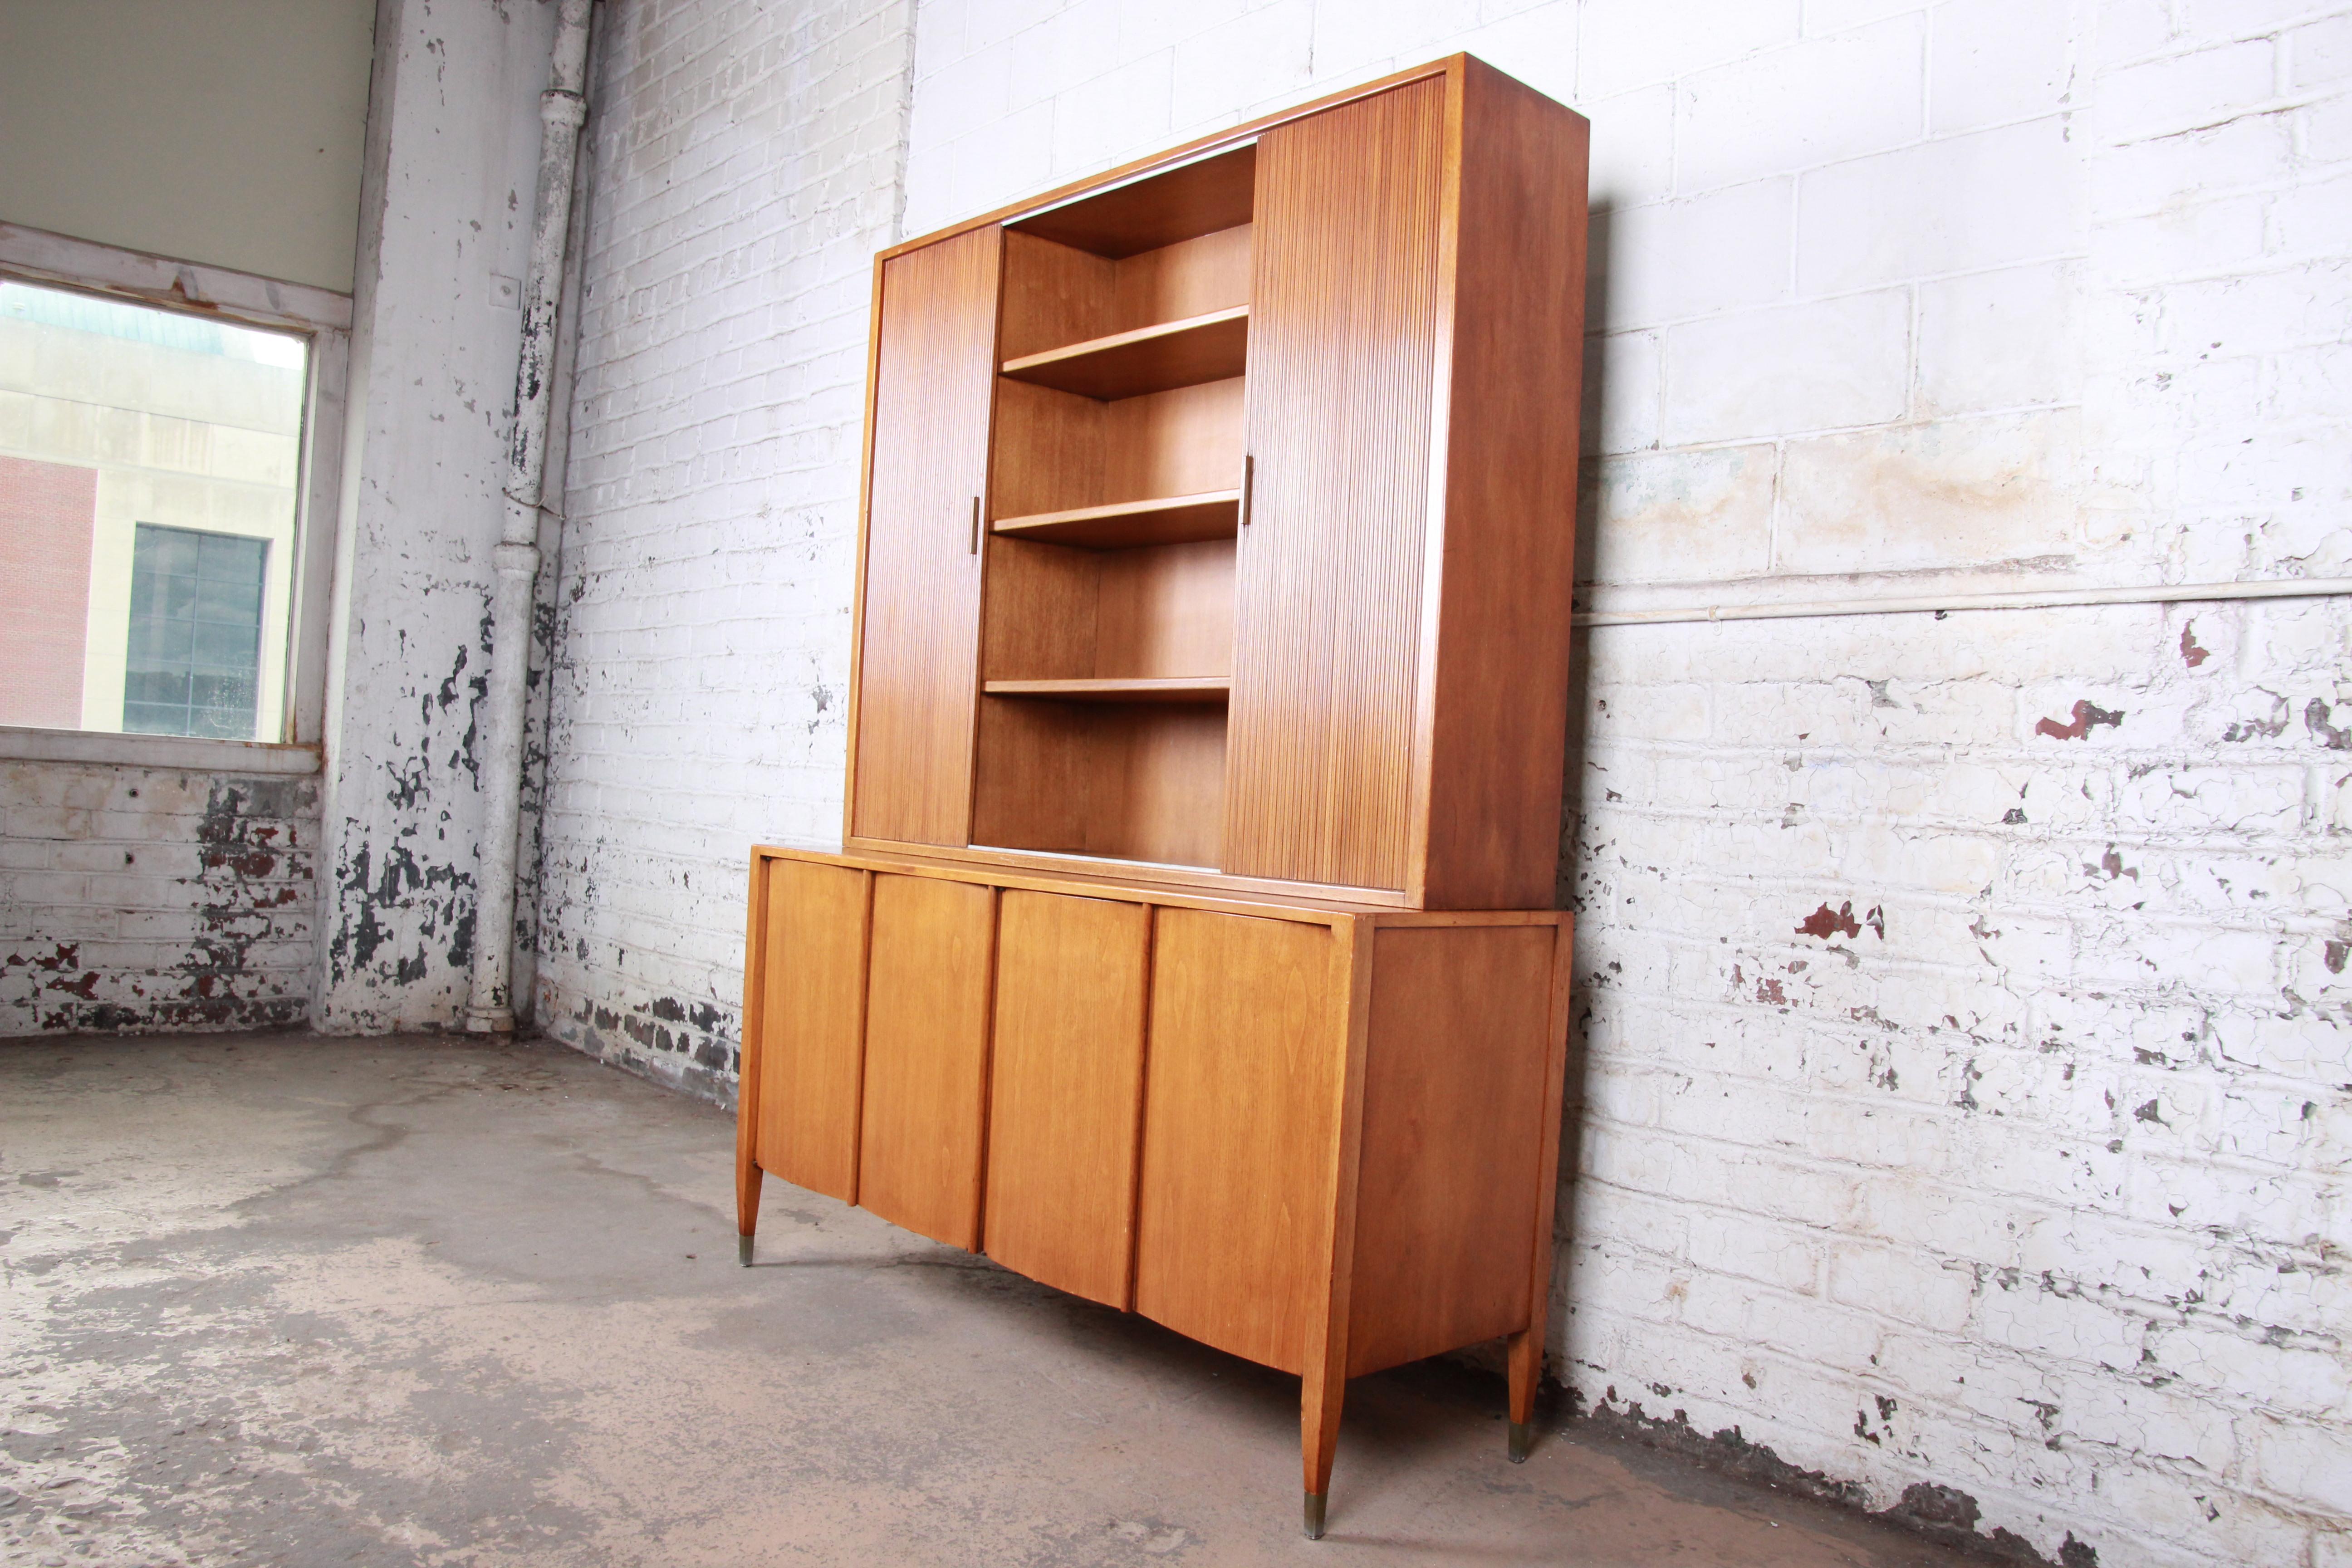 A gorgeous Mid-Century Modern sideboard credenza with bookcase hutch top by Sligh Furniture of Grand Rapids. The credenza features beautiful walnut wood grain with sleek midcentury lines. The top has three shelved cabinets with two sliding wood